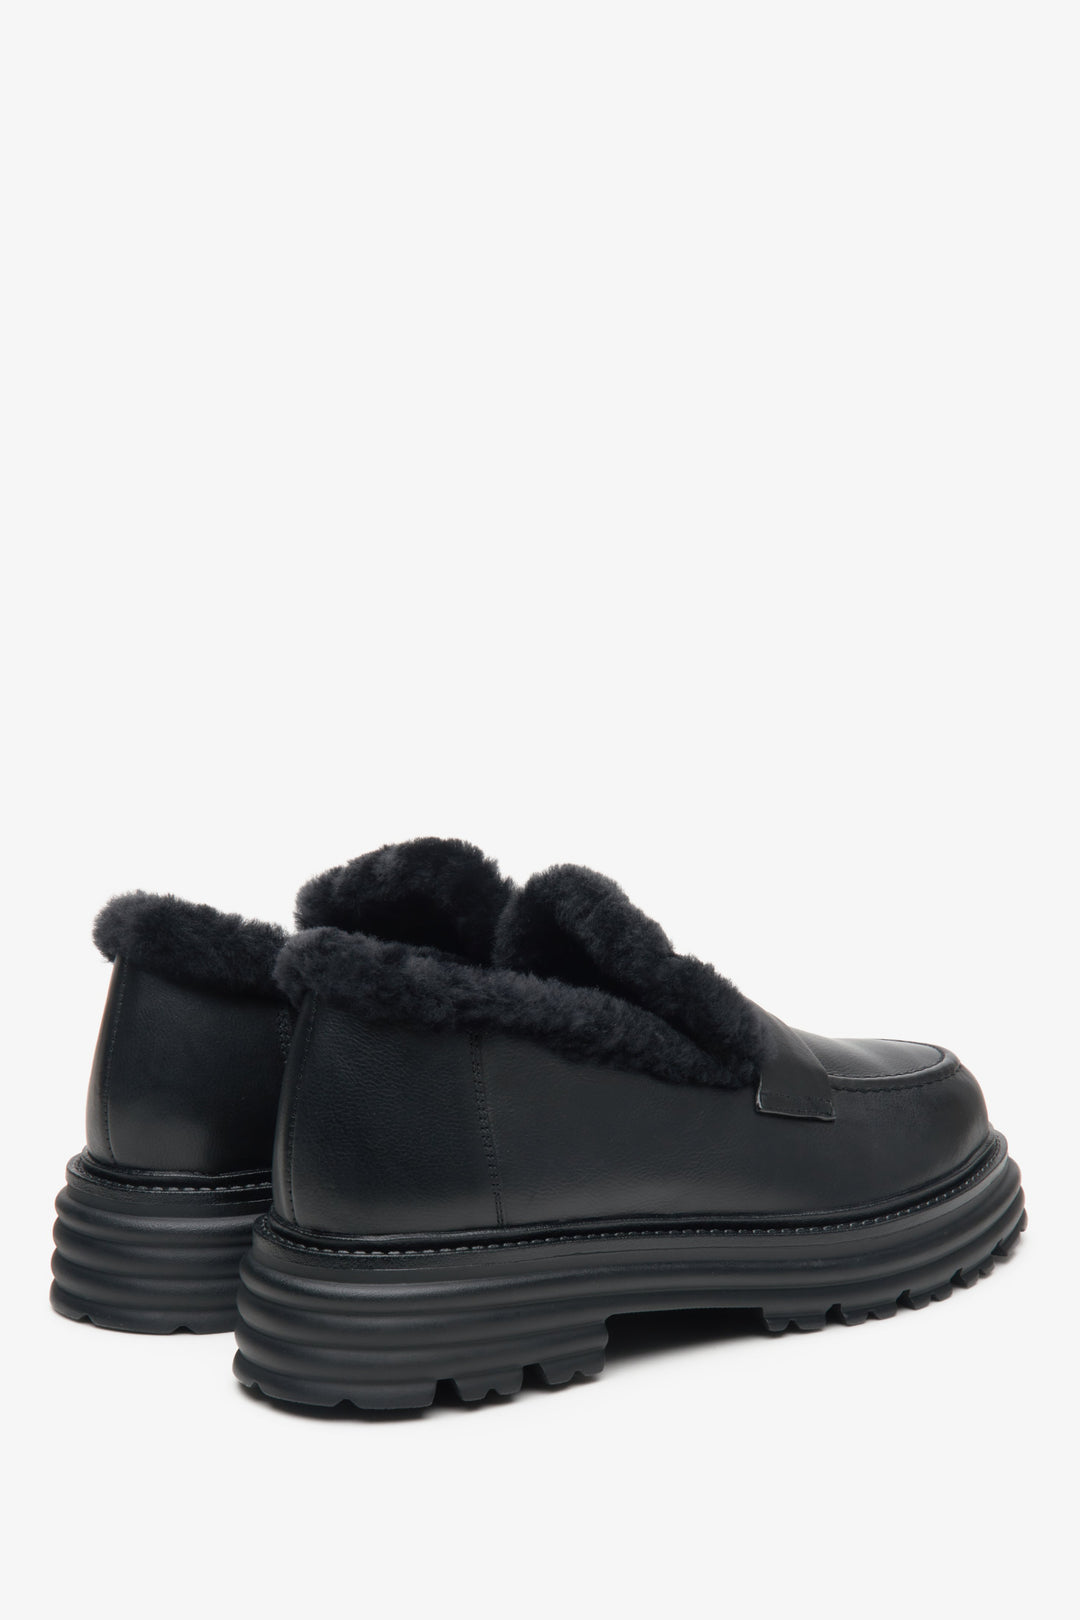 Women's leather moccasins by Estro in black with insulation - close-up on the heel and side line of the shoes.